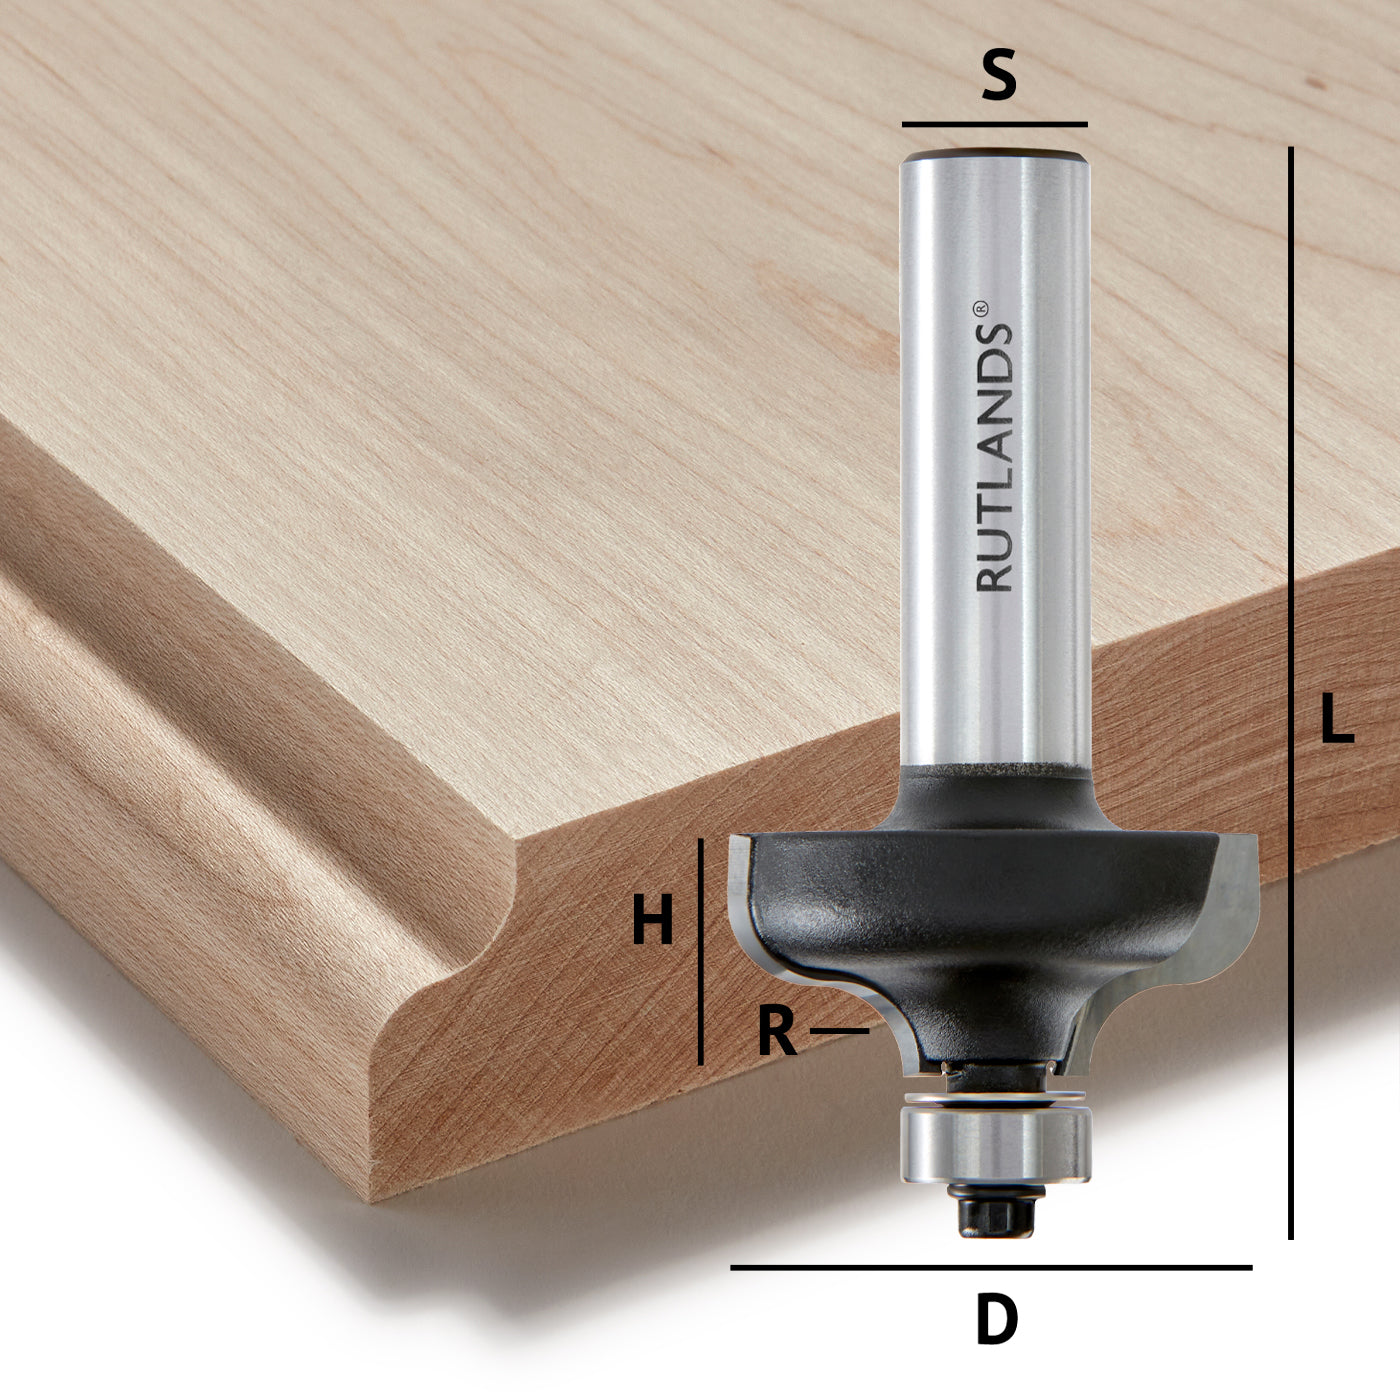 Router Bit - Ogee